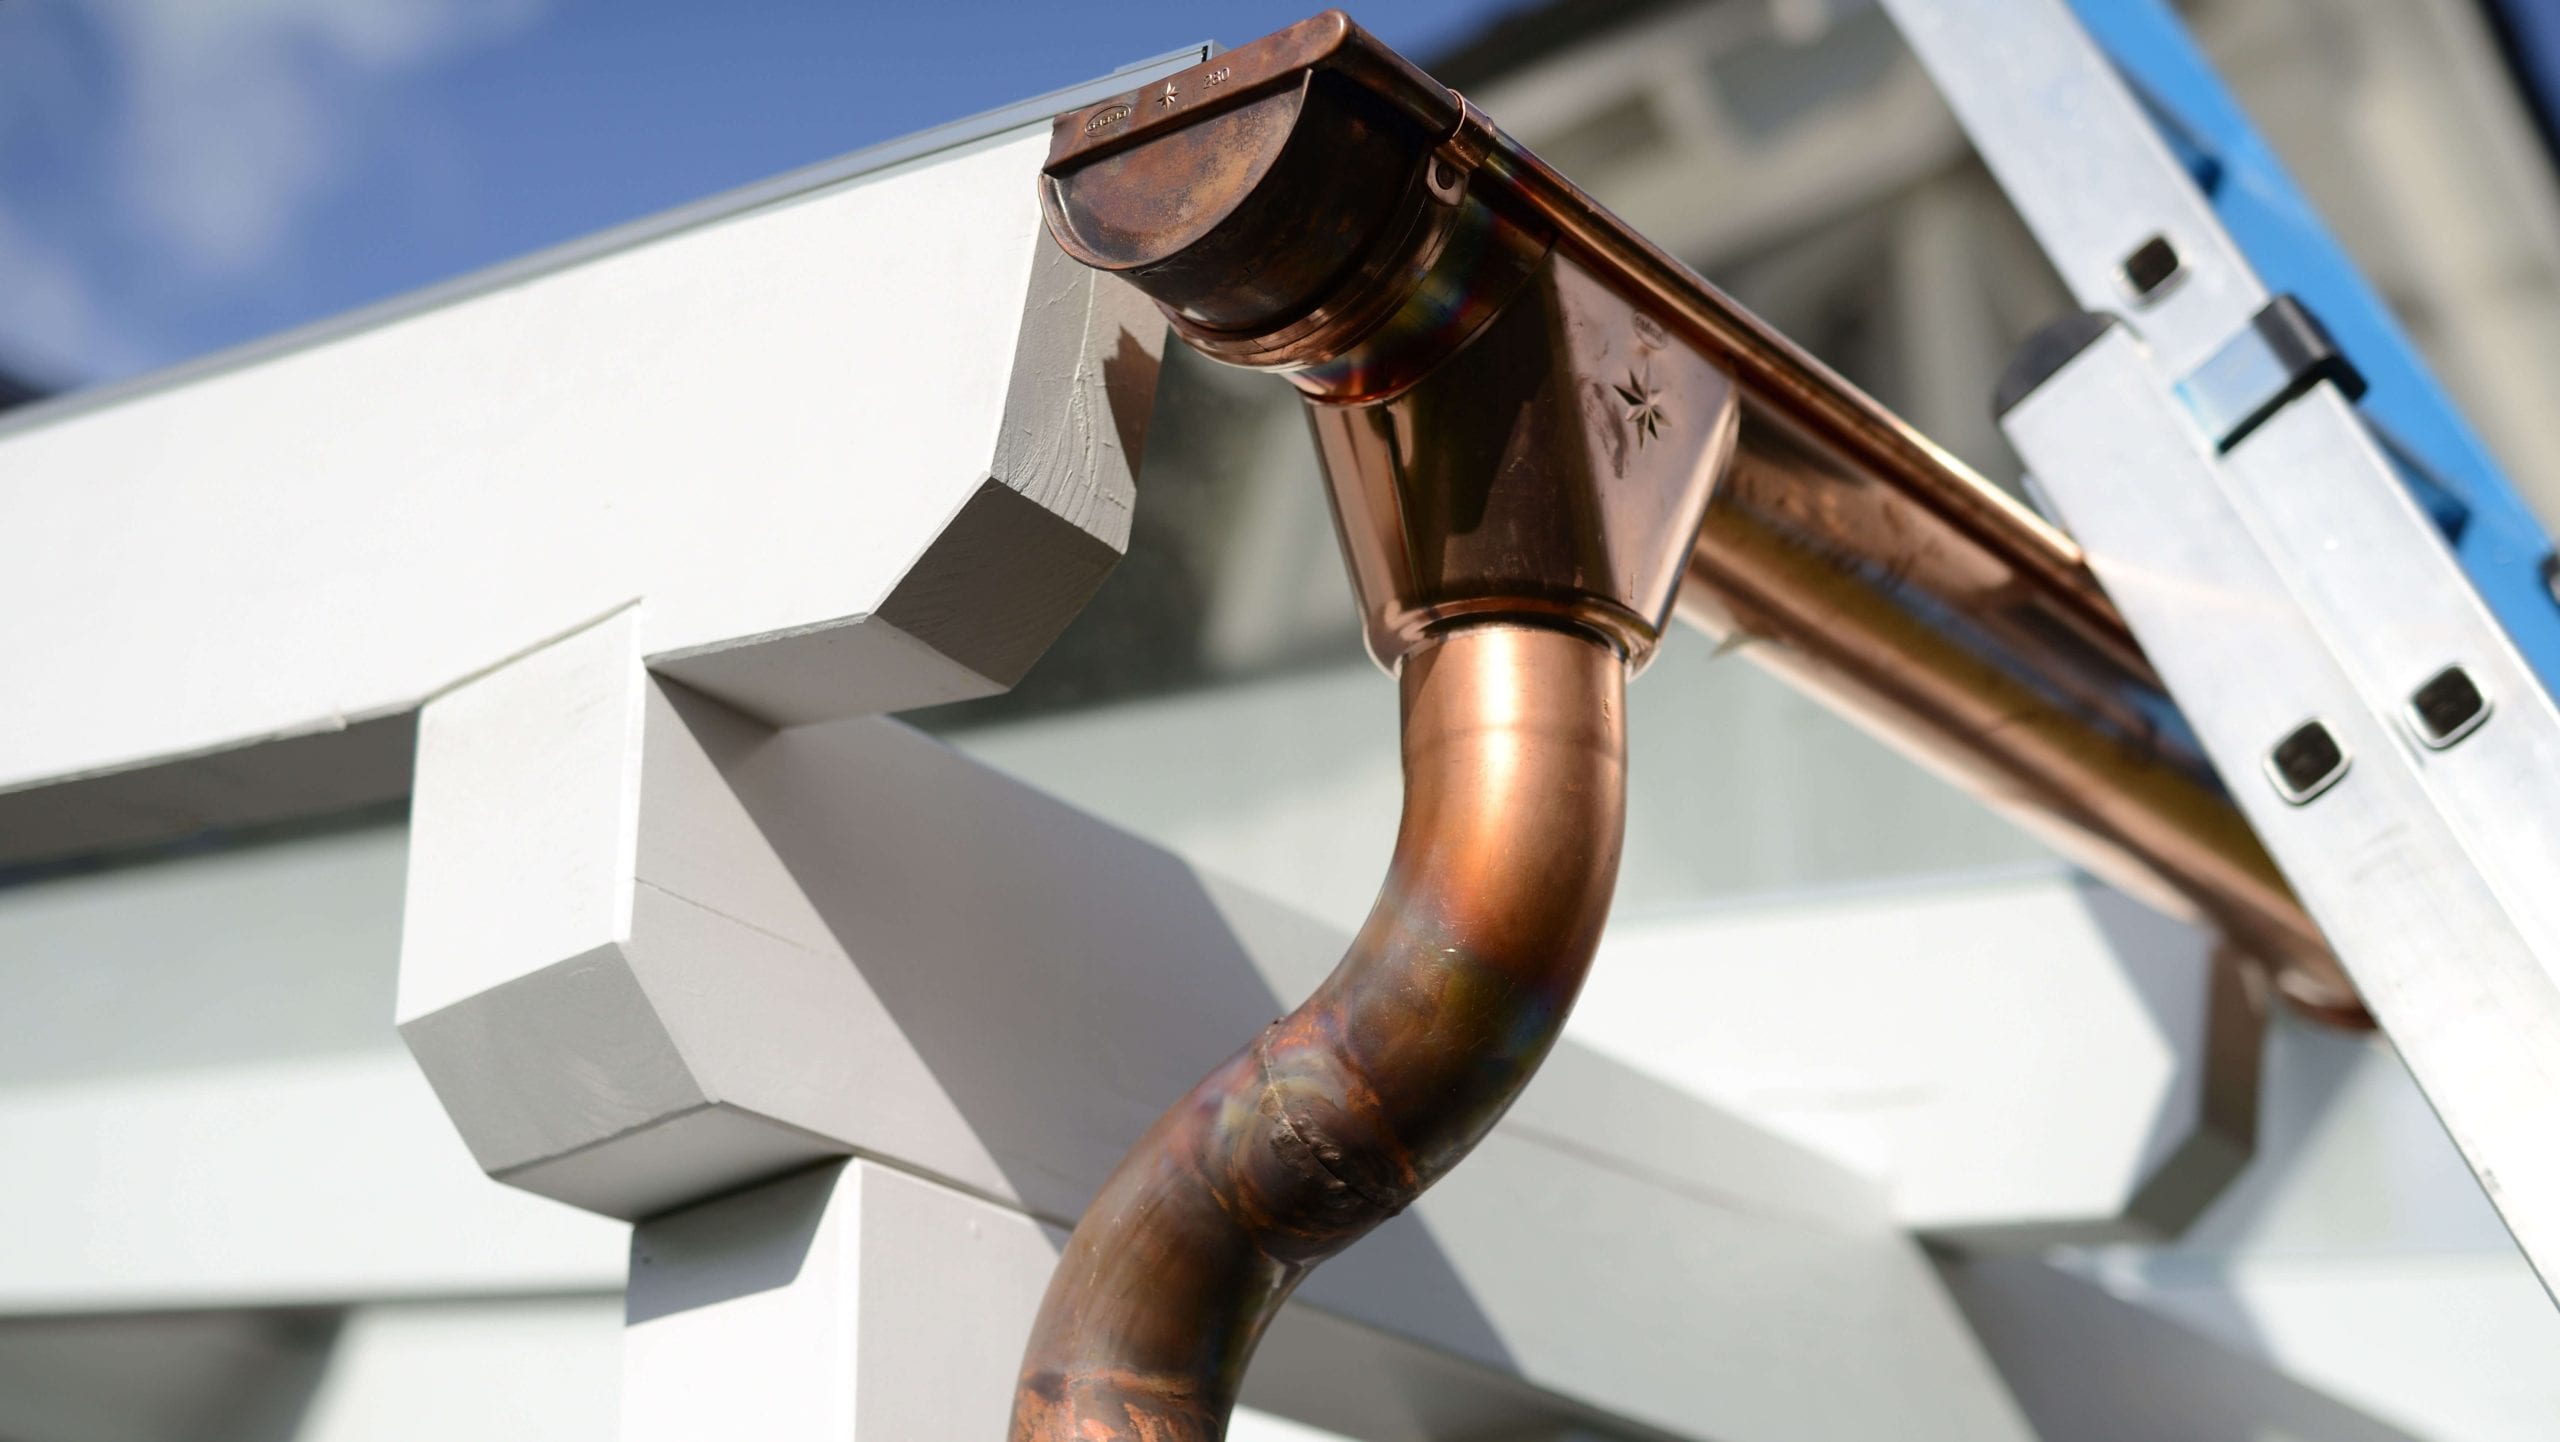 Make your property stand out with copper gutters. Contact for gutter installation in Bradenton